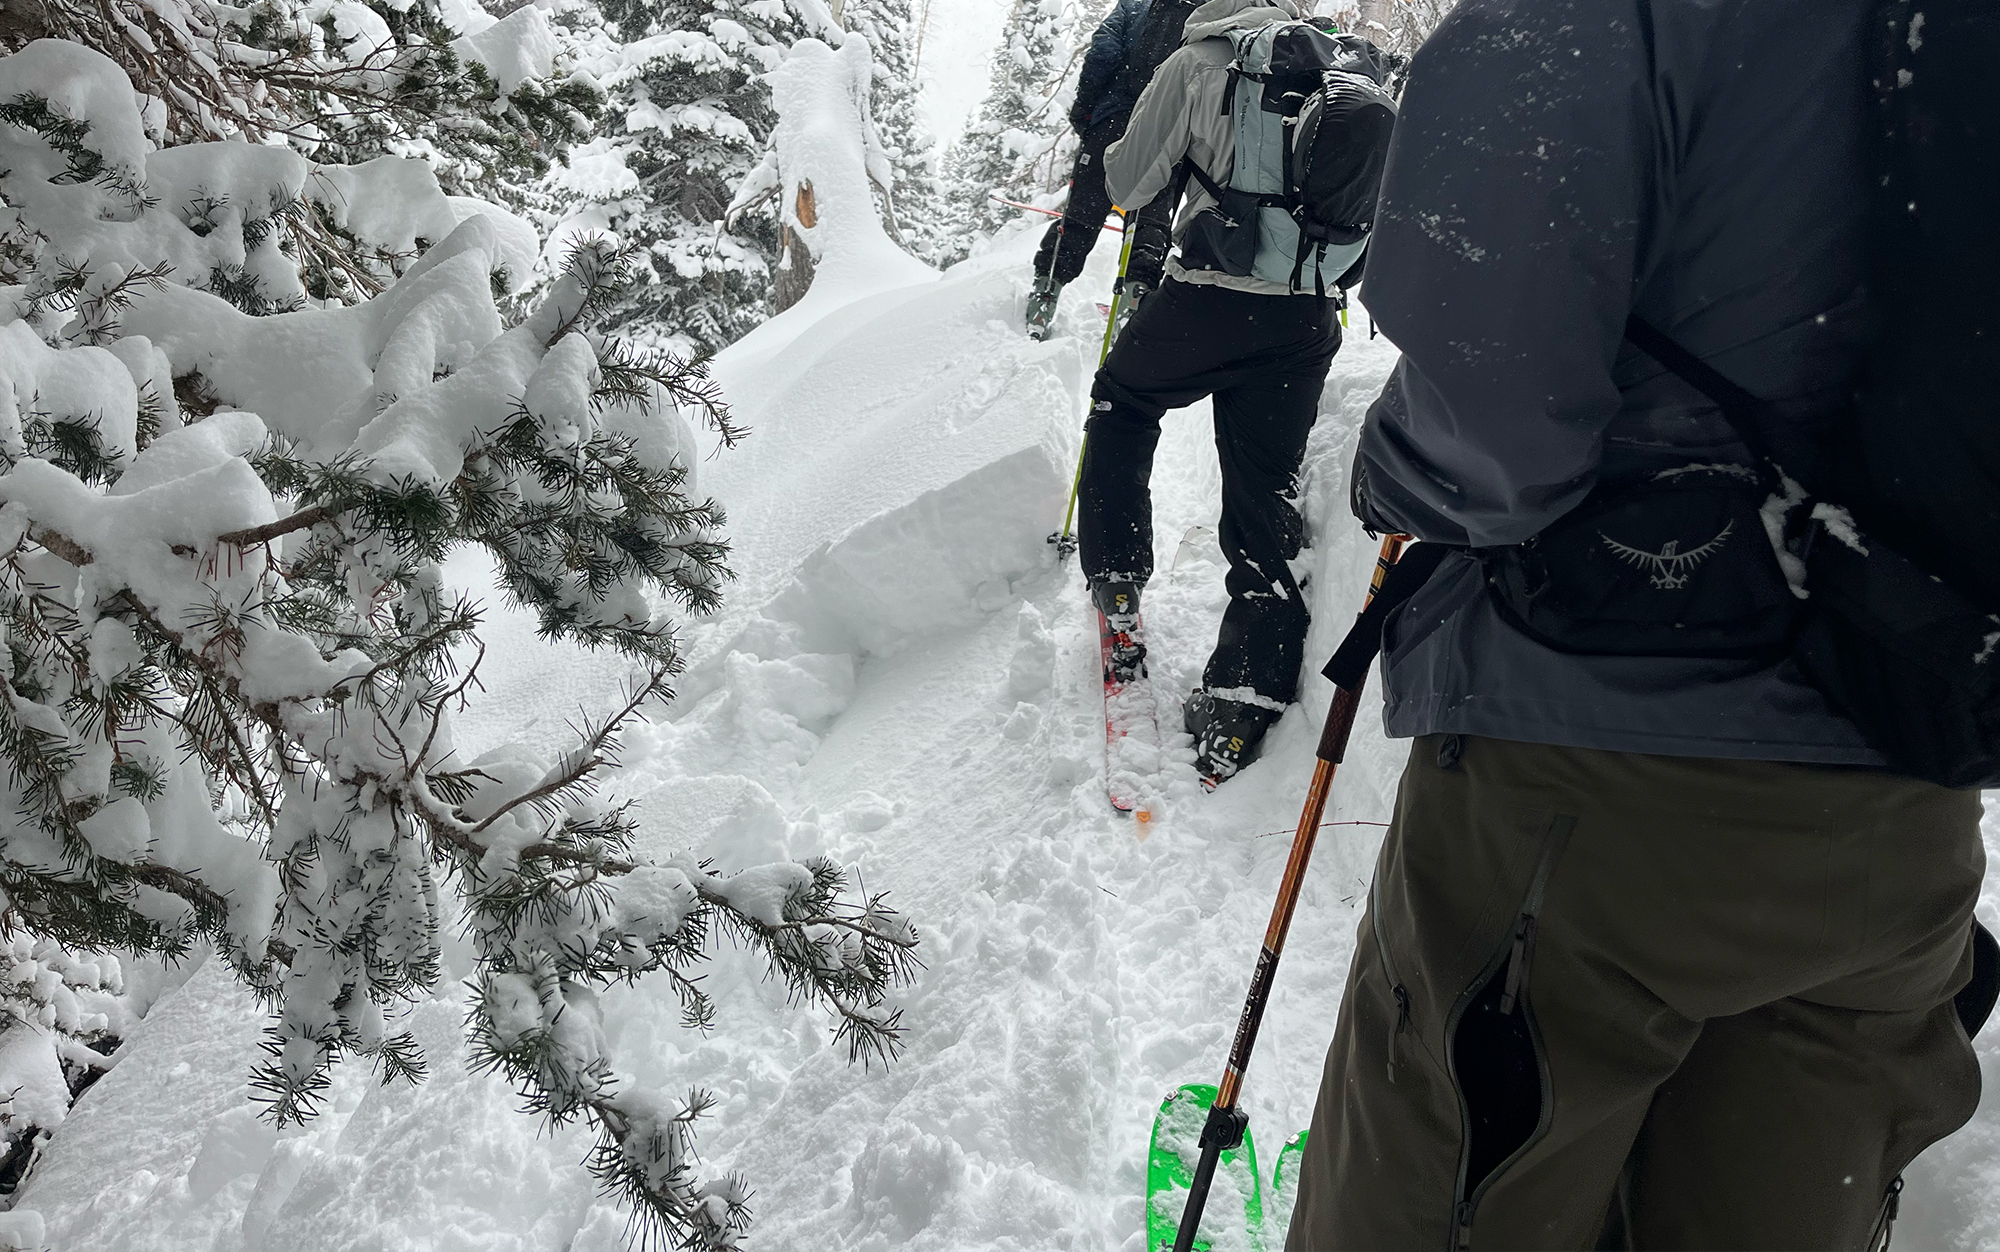 A small slab avalanche breaks under our feet during a high danger field session. We are purposefully staying on low angle terrain for exactly this reason.